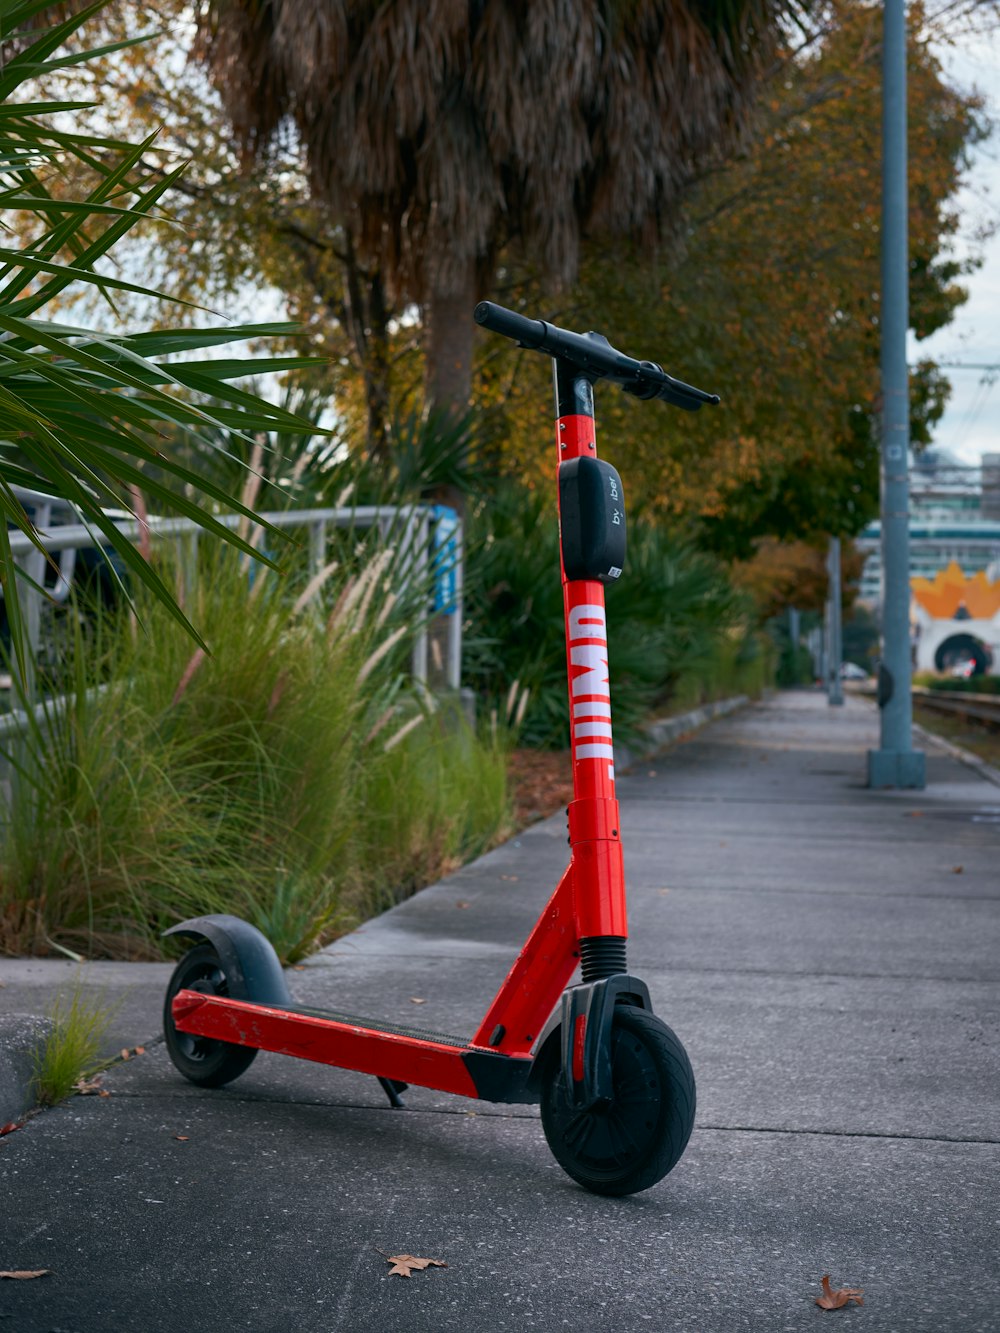 red and black kick scooter on gray concrete road during daytime